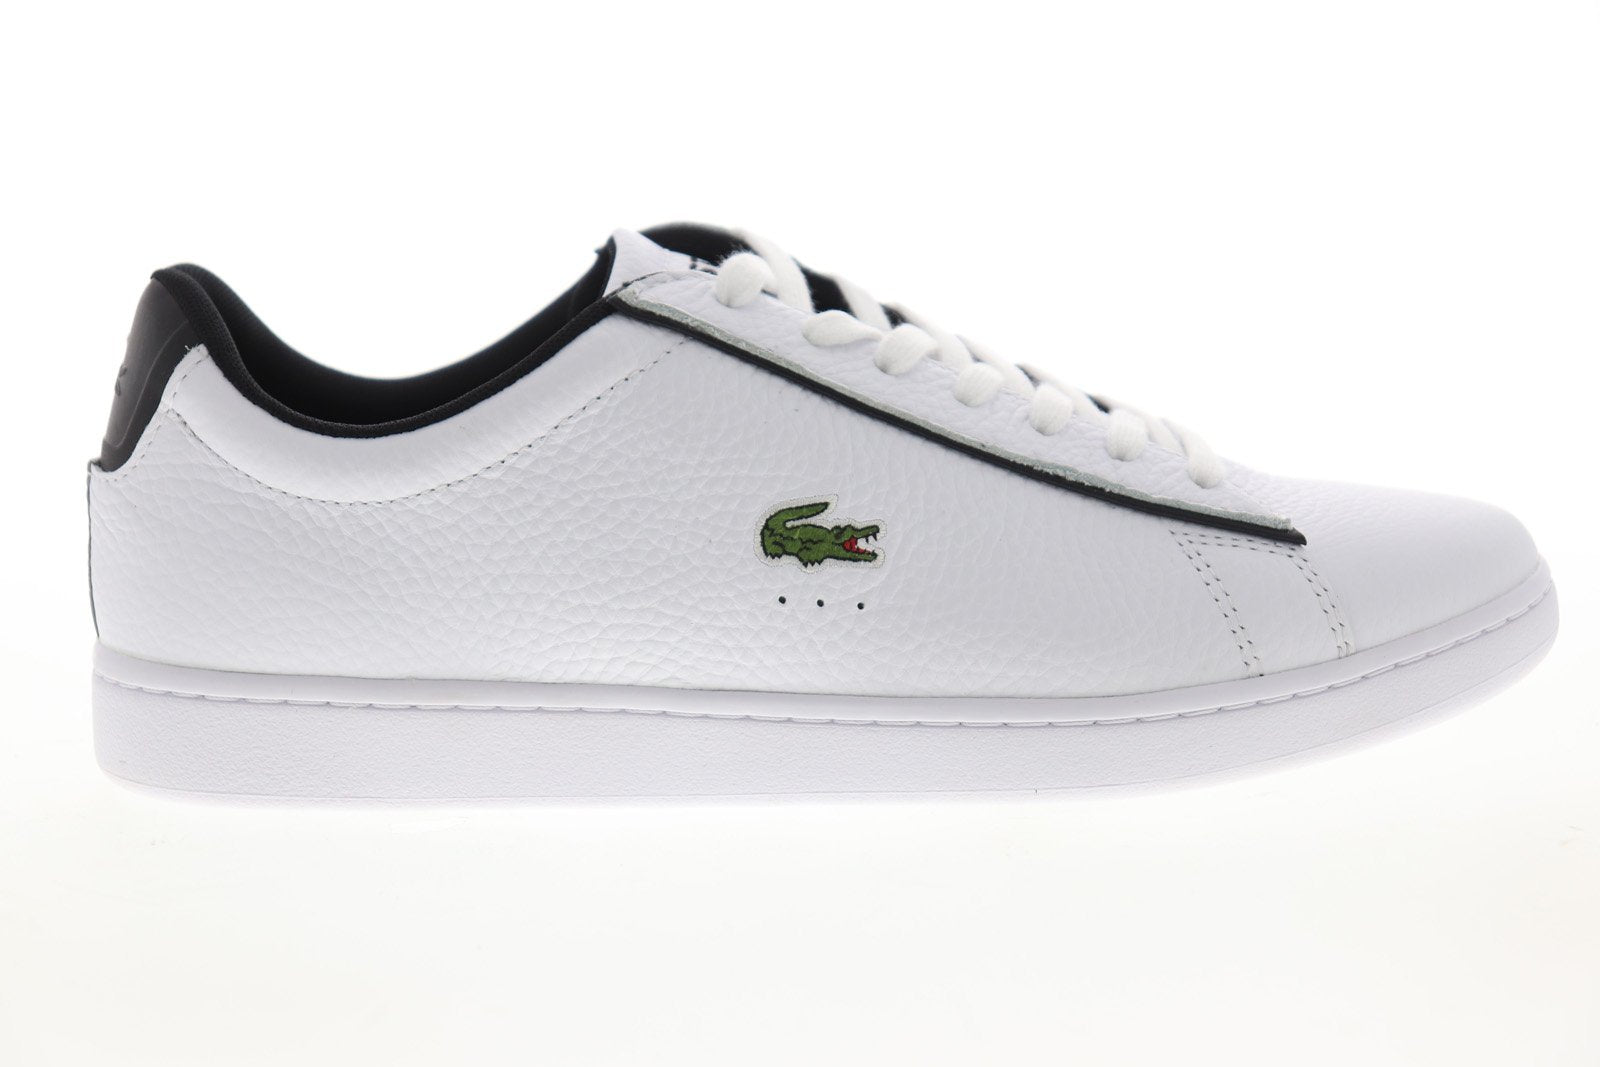 Lacoste Carnaby Evo 120 2 Sma Mens White Leather Lifestyle Sneakers Sh ...